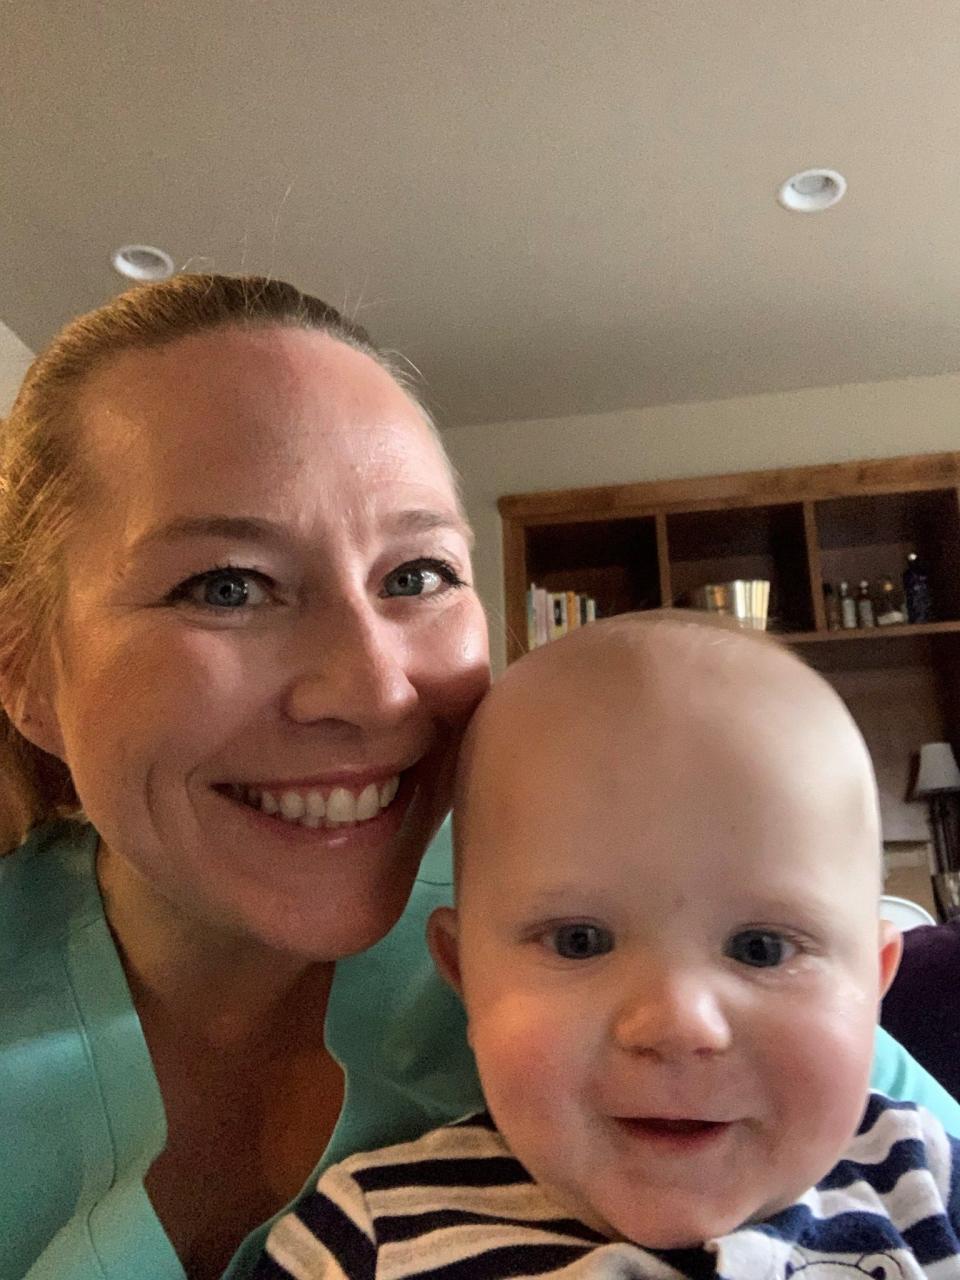 Bailey Cannon Dean, who is breastfeeding her son River, says there are many challenges for working mothers who want to continue providing breast milk to their babies